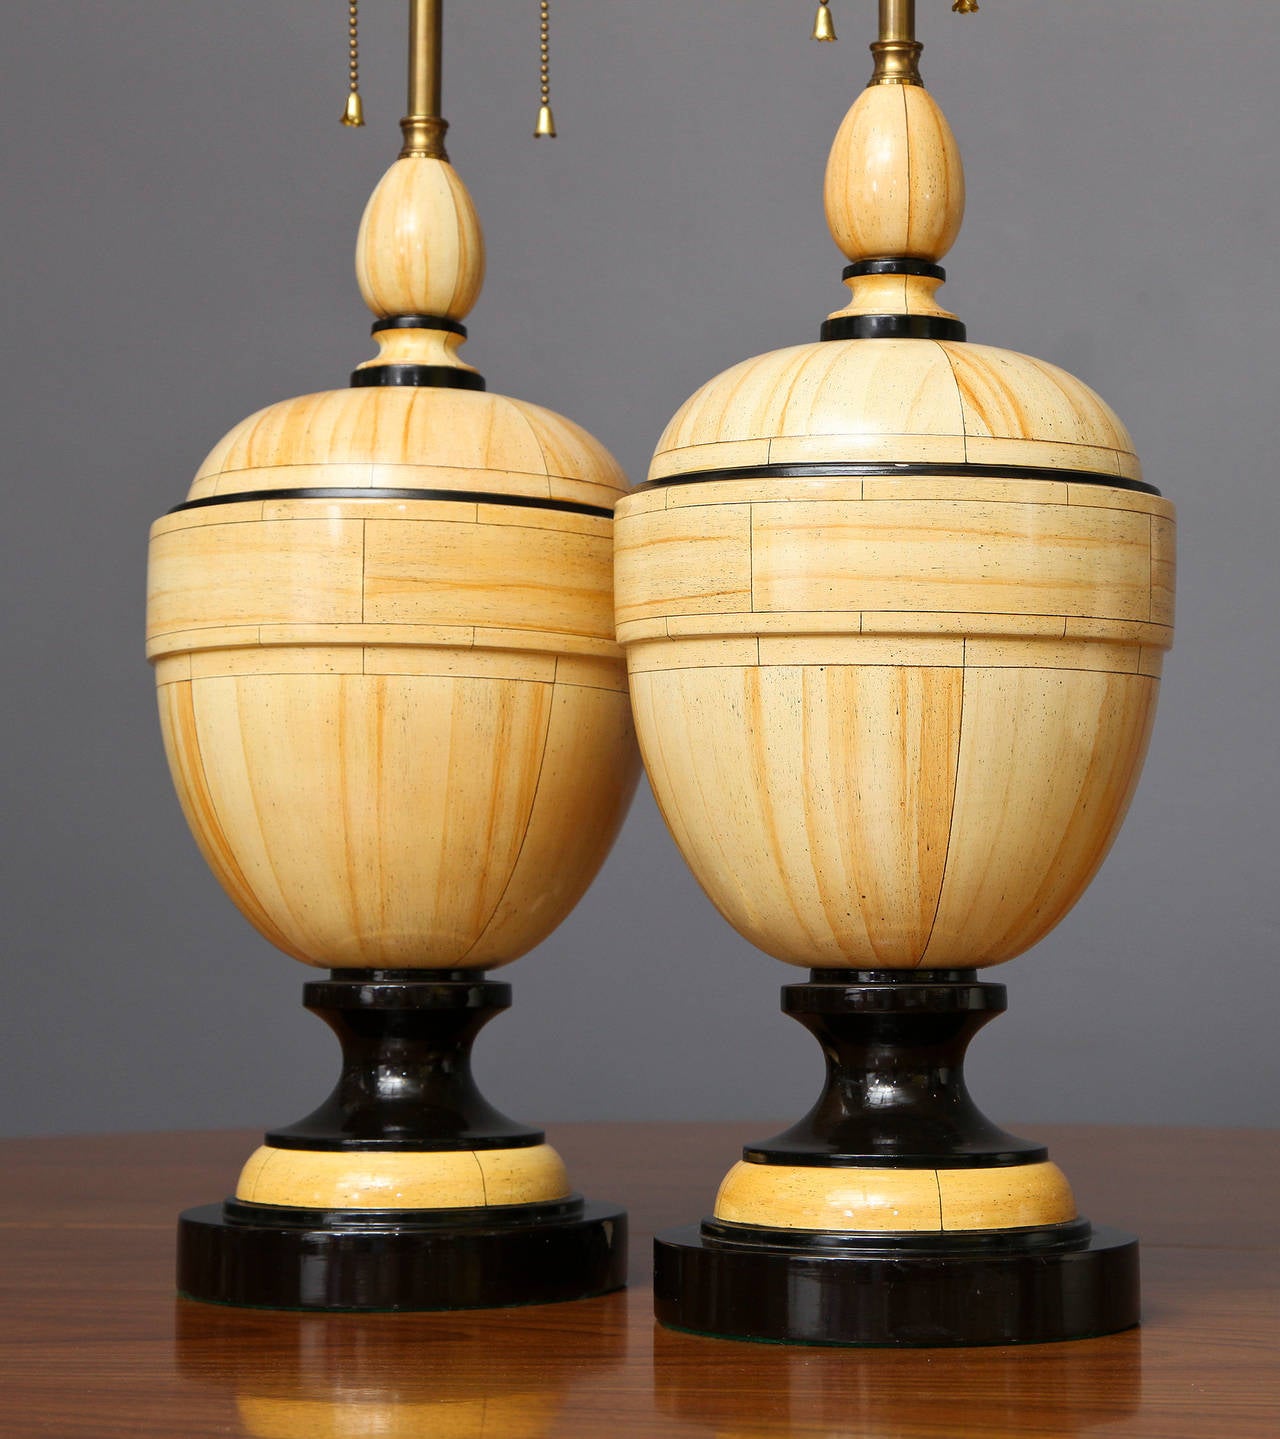 Jean Roger
Pair of table lamps in wood with a faux ivory and black lacquered finish and black penwork decoration of trompe l’oeil architectural details, 
French, circa 1970

Measurements: 28” H overall/ 16.75” H base x 7.5” diameter.